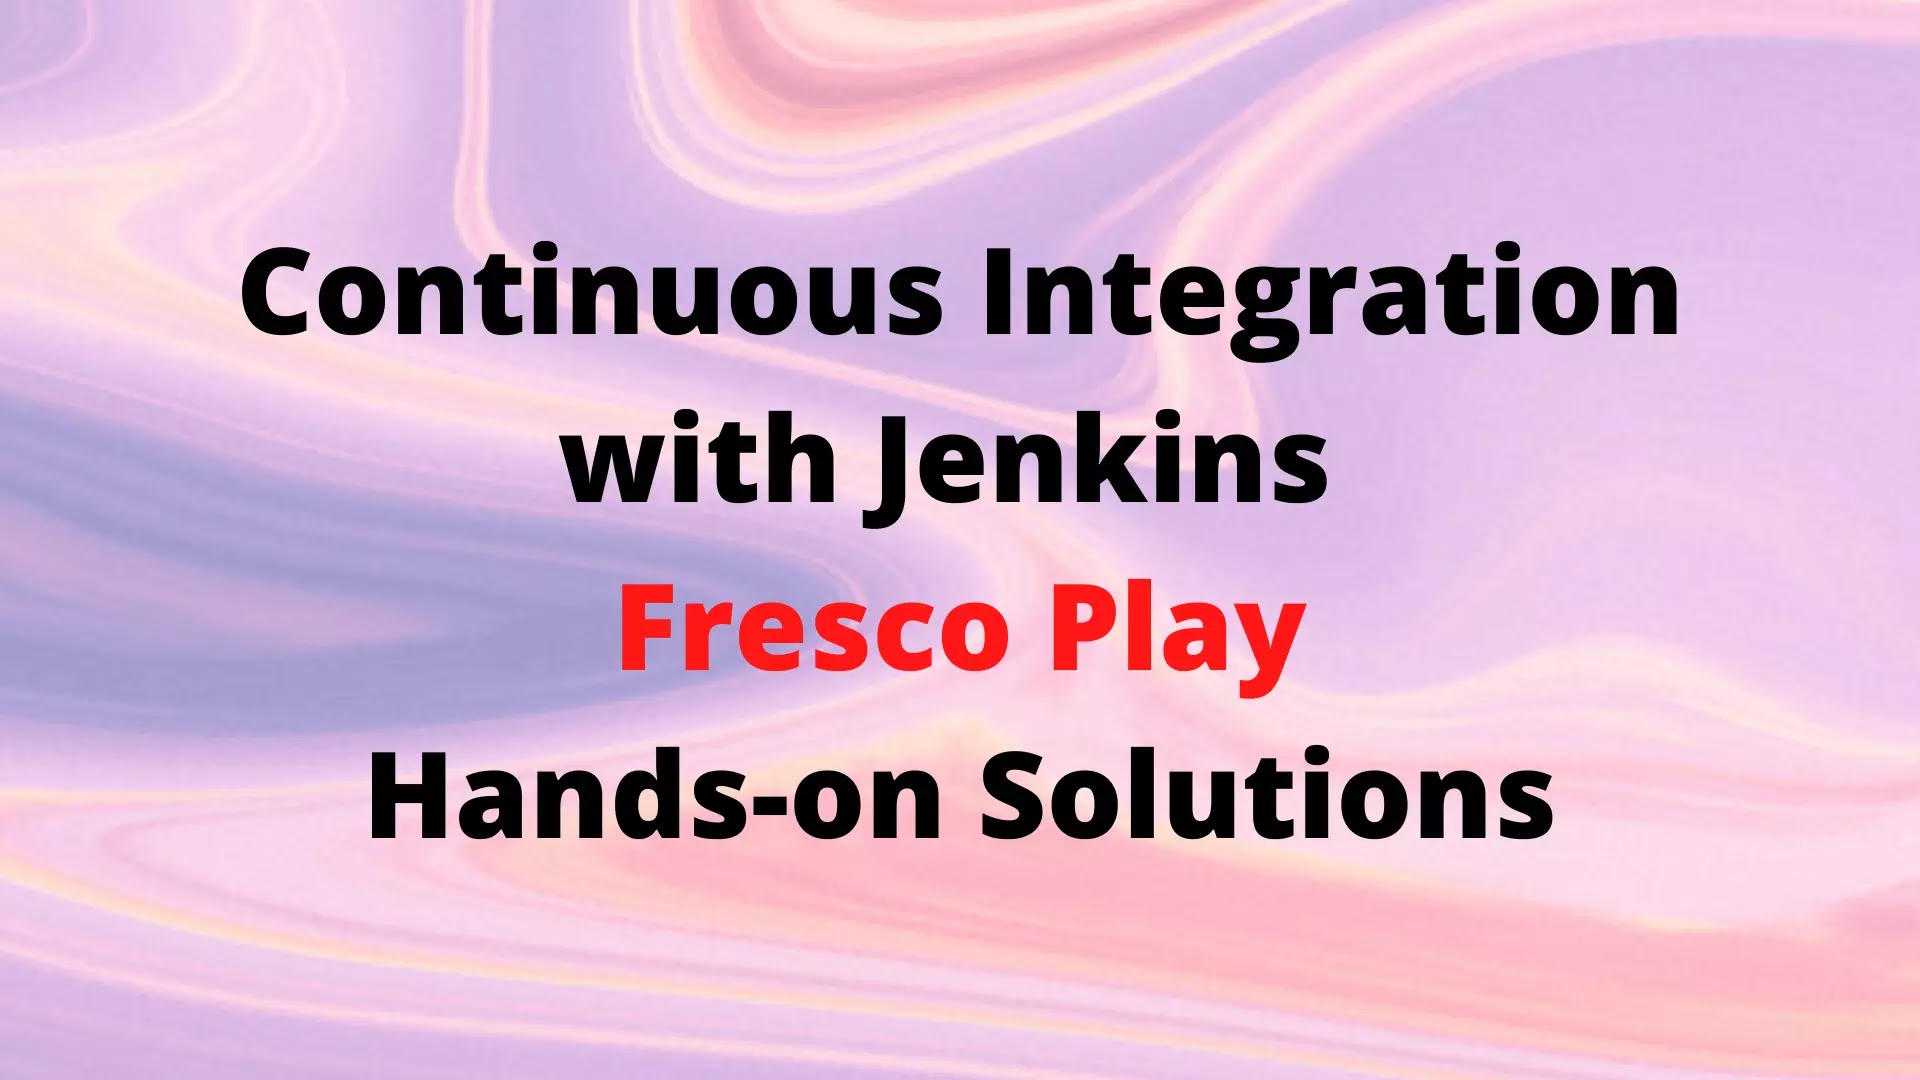 Continuous Integration with Jenkins Hands-on Solutions | TCS Fresco Play